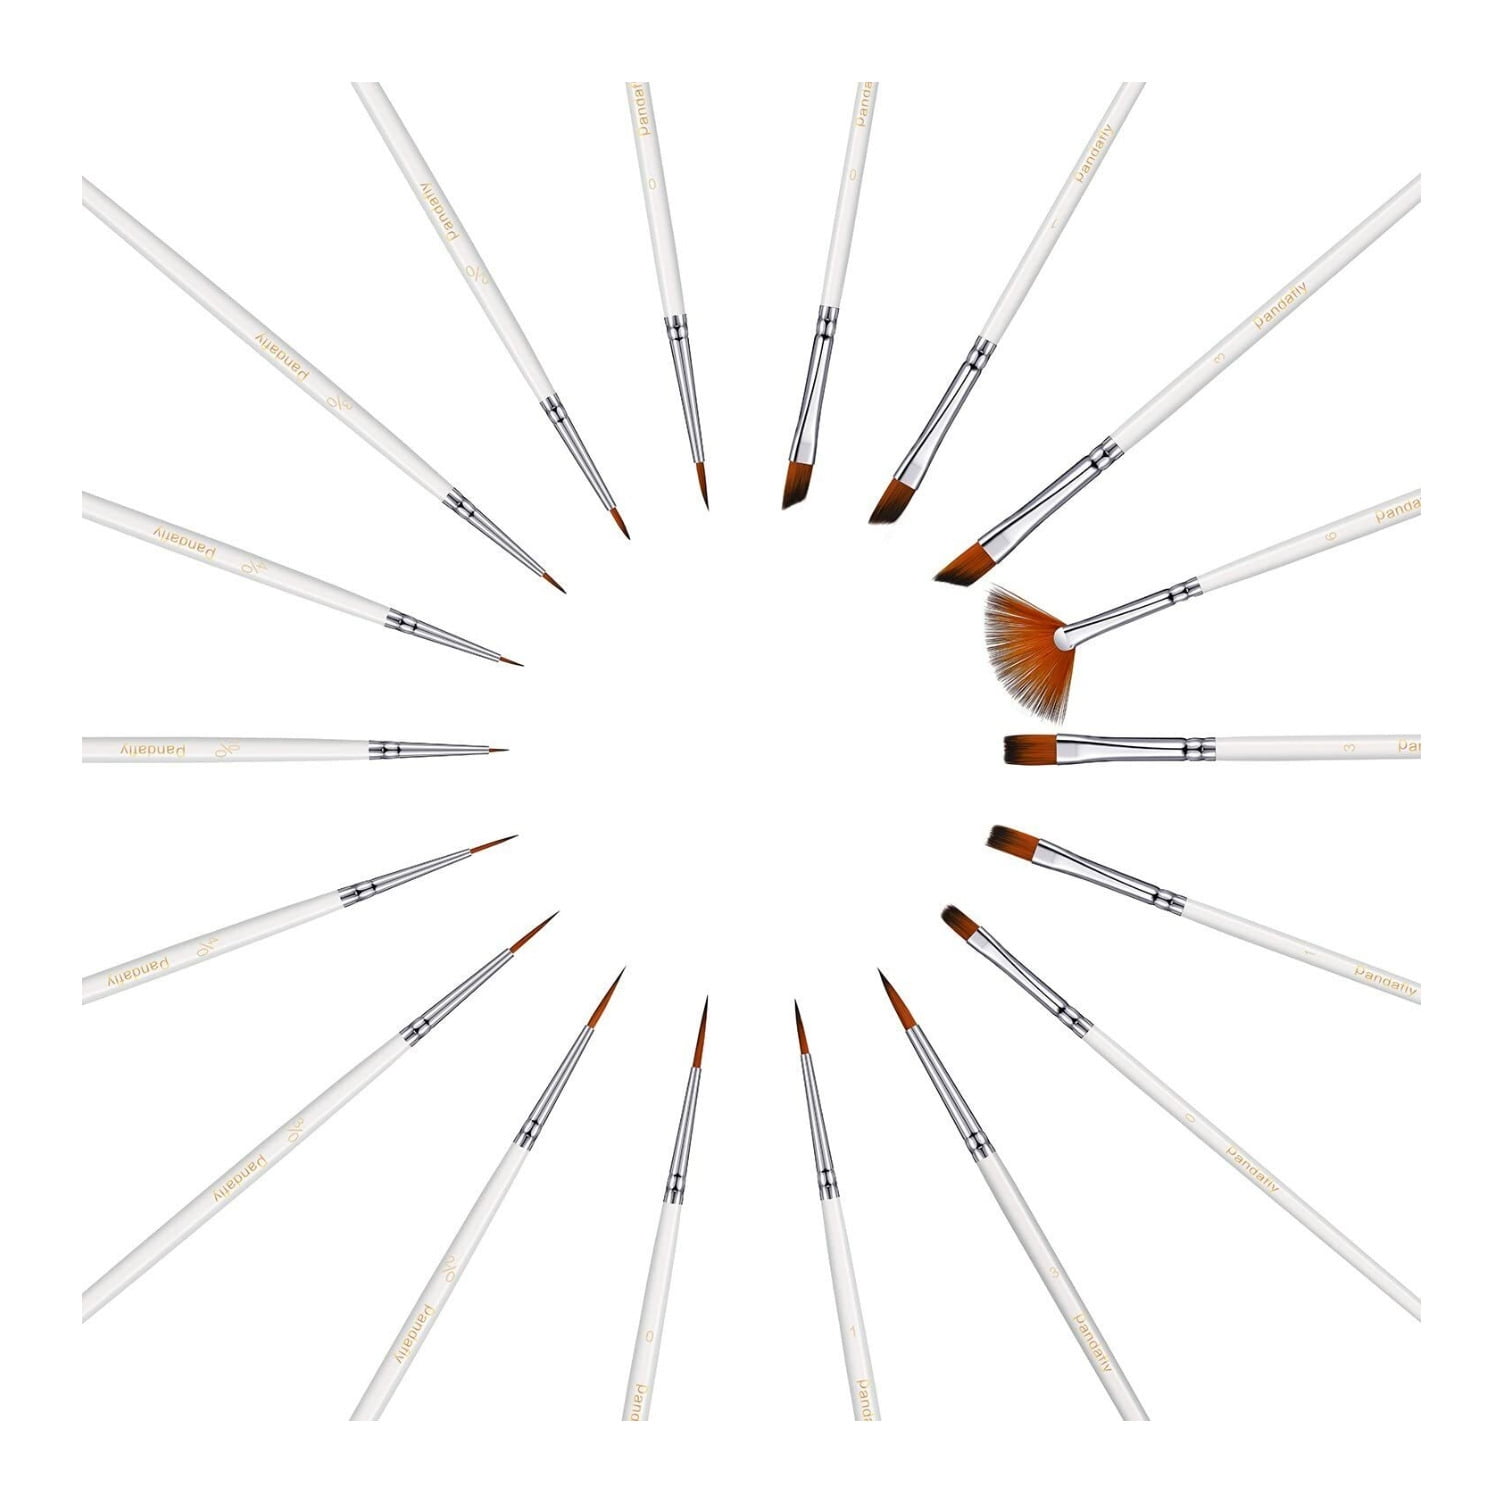 Pandafly P908-15 PANDAFLY Detail Paint Brushes Set, 15pcs Miniature Paint  Brushes for Fine Detailing & Art Painting - Acrylic, Watercolor, Oil, M